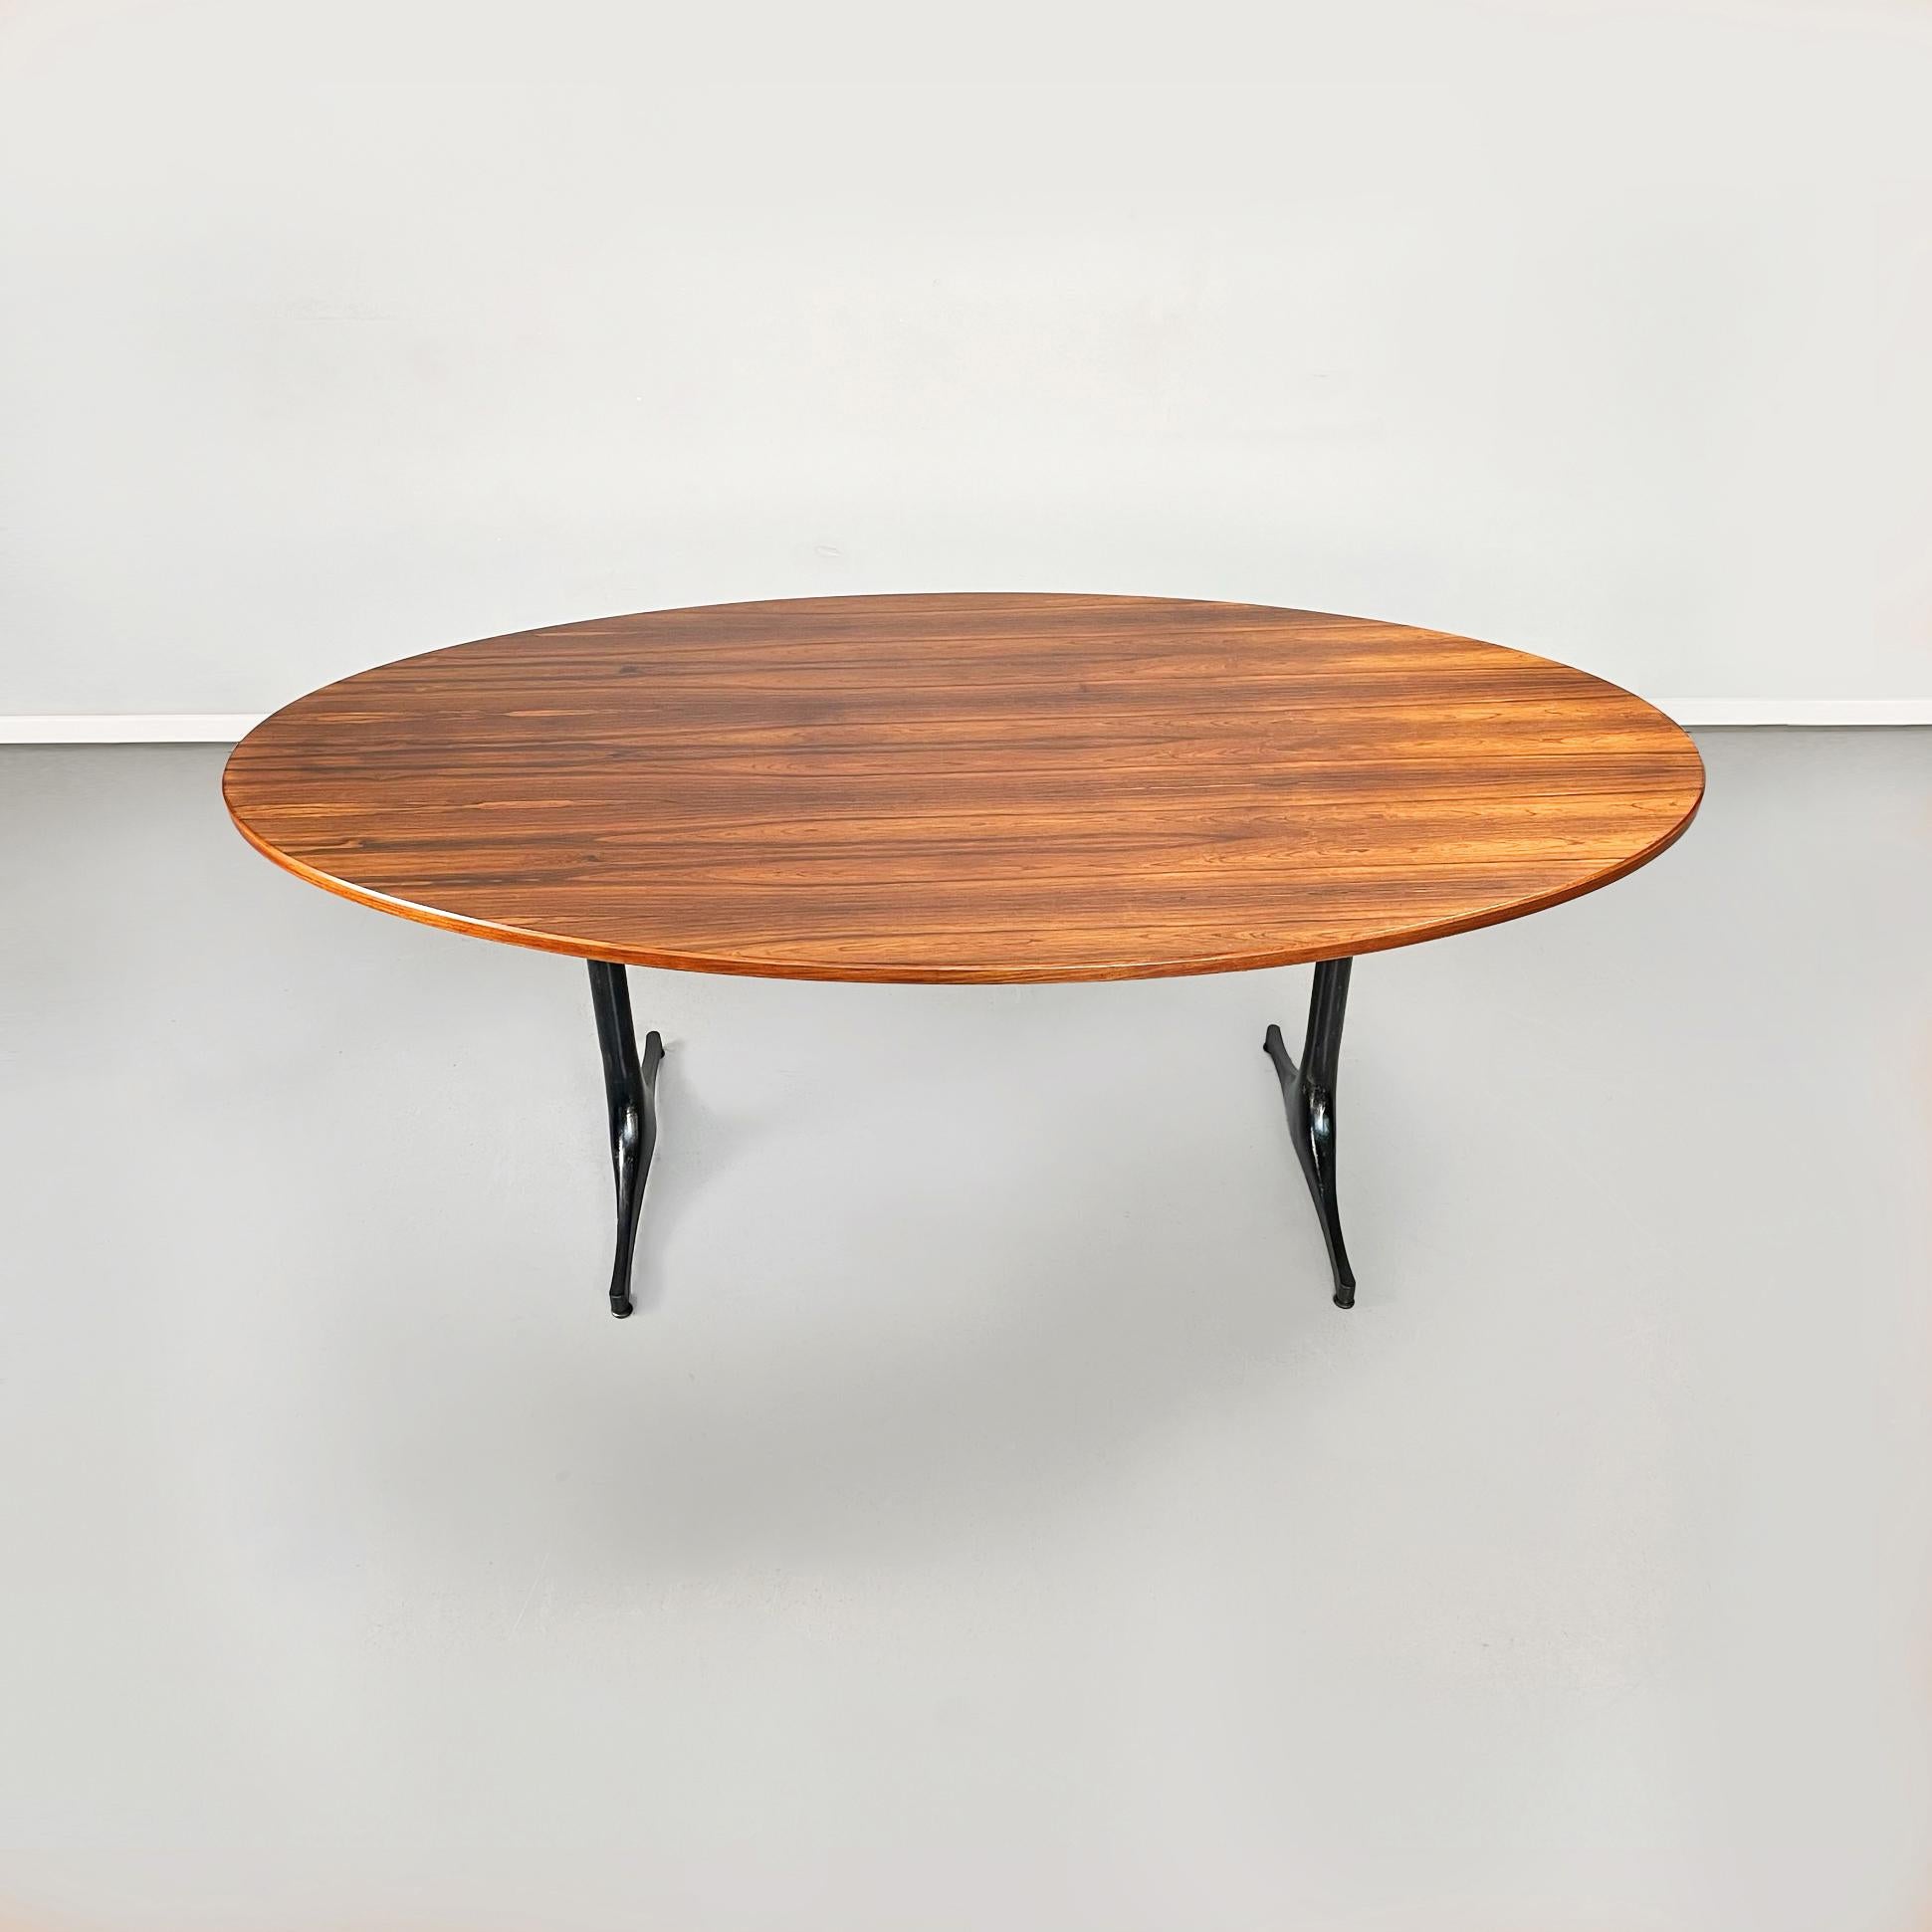 Mid-20th Century American Modern Wood Metal Dining Table by George Nelson Herman Miller, 1960s For Sale